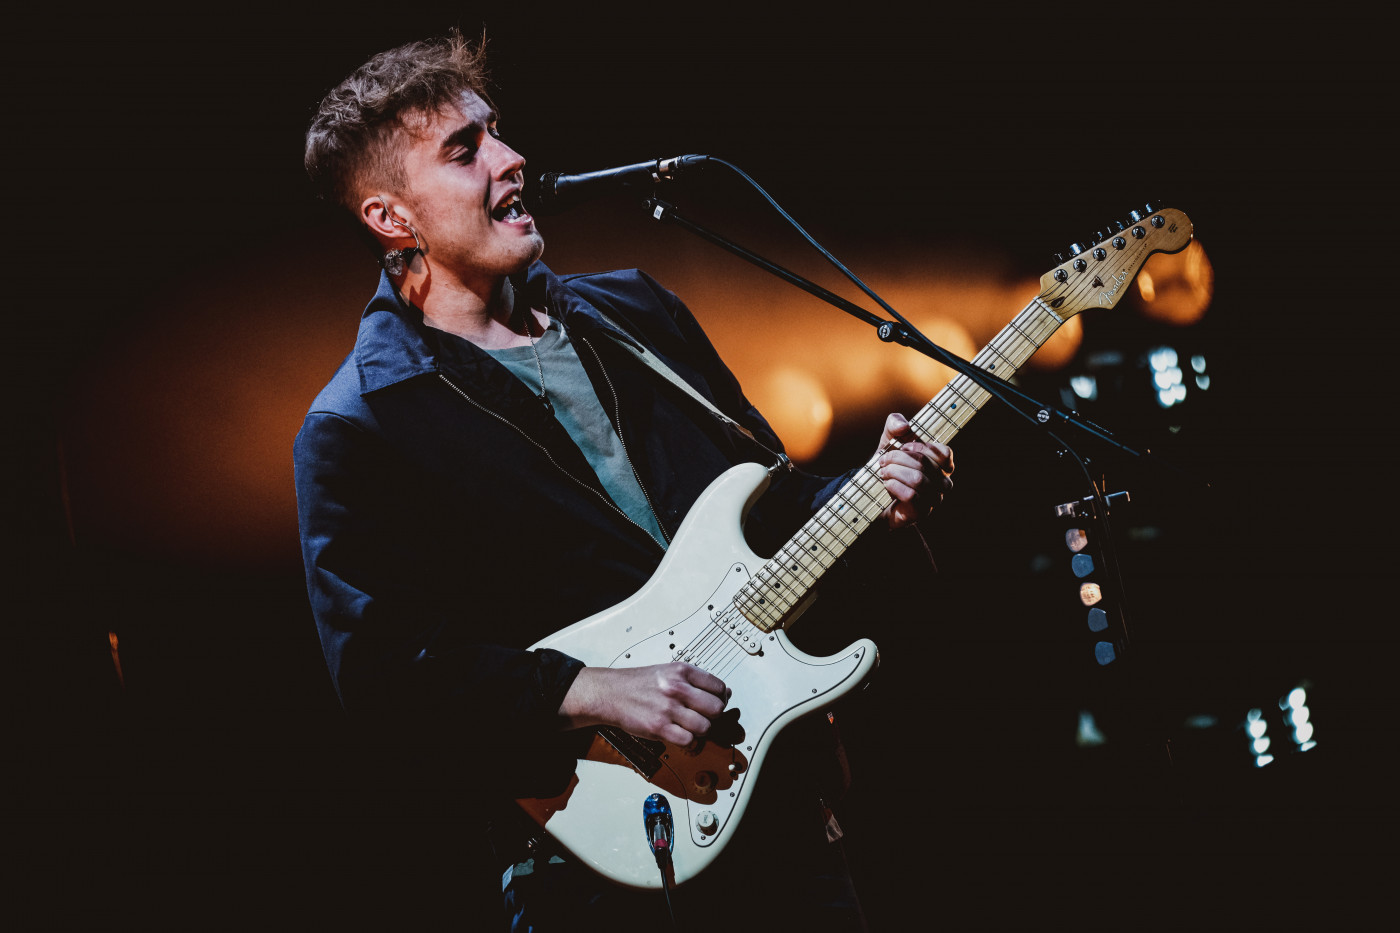 Sam Fender closes the 2021 edition of This Is Tomorrow Festival